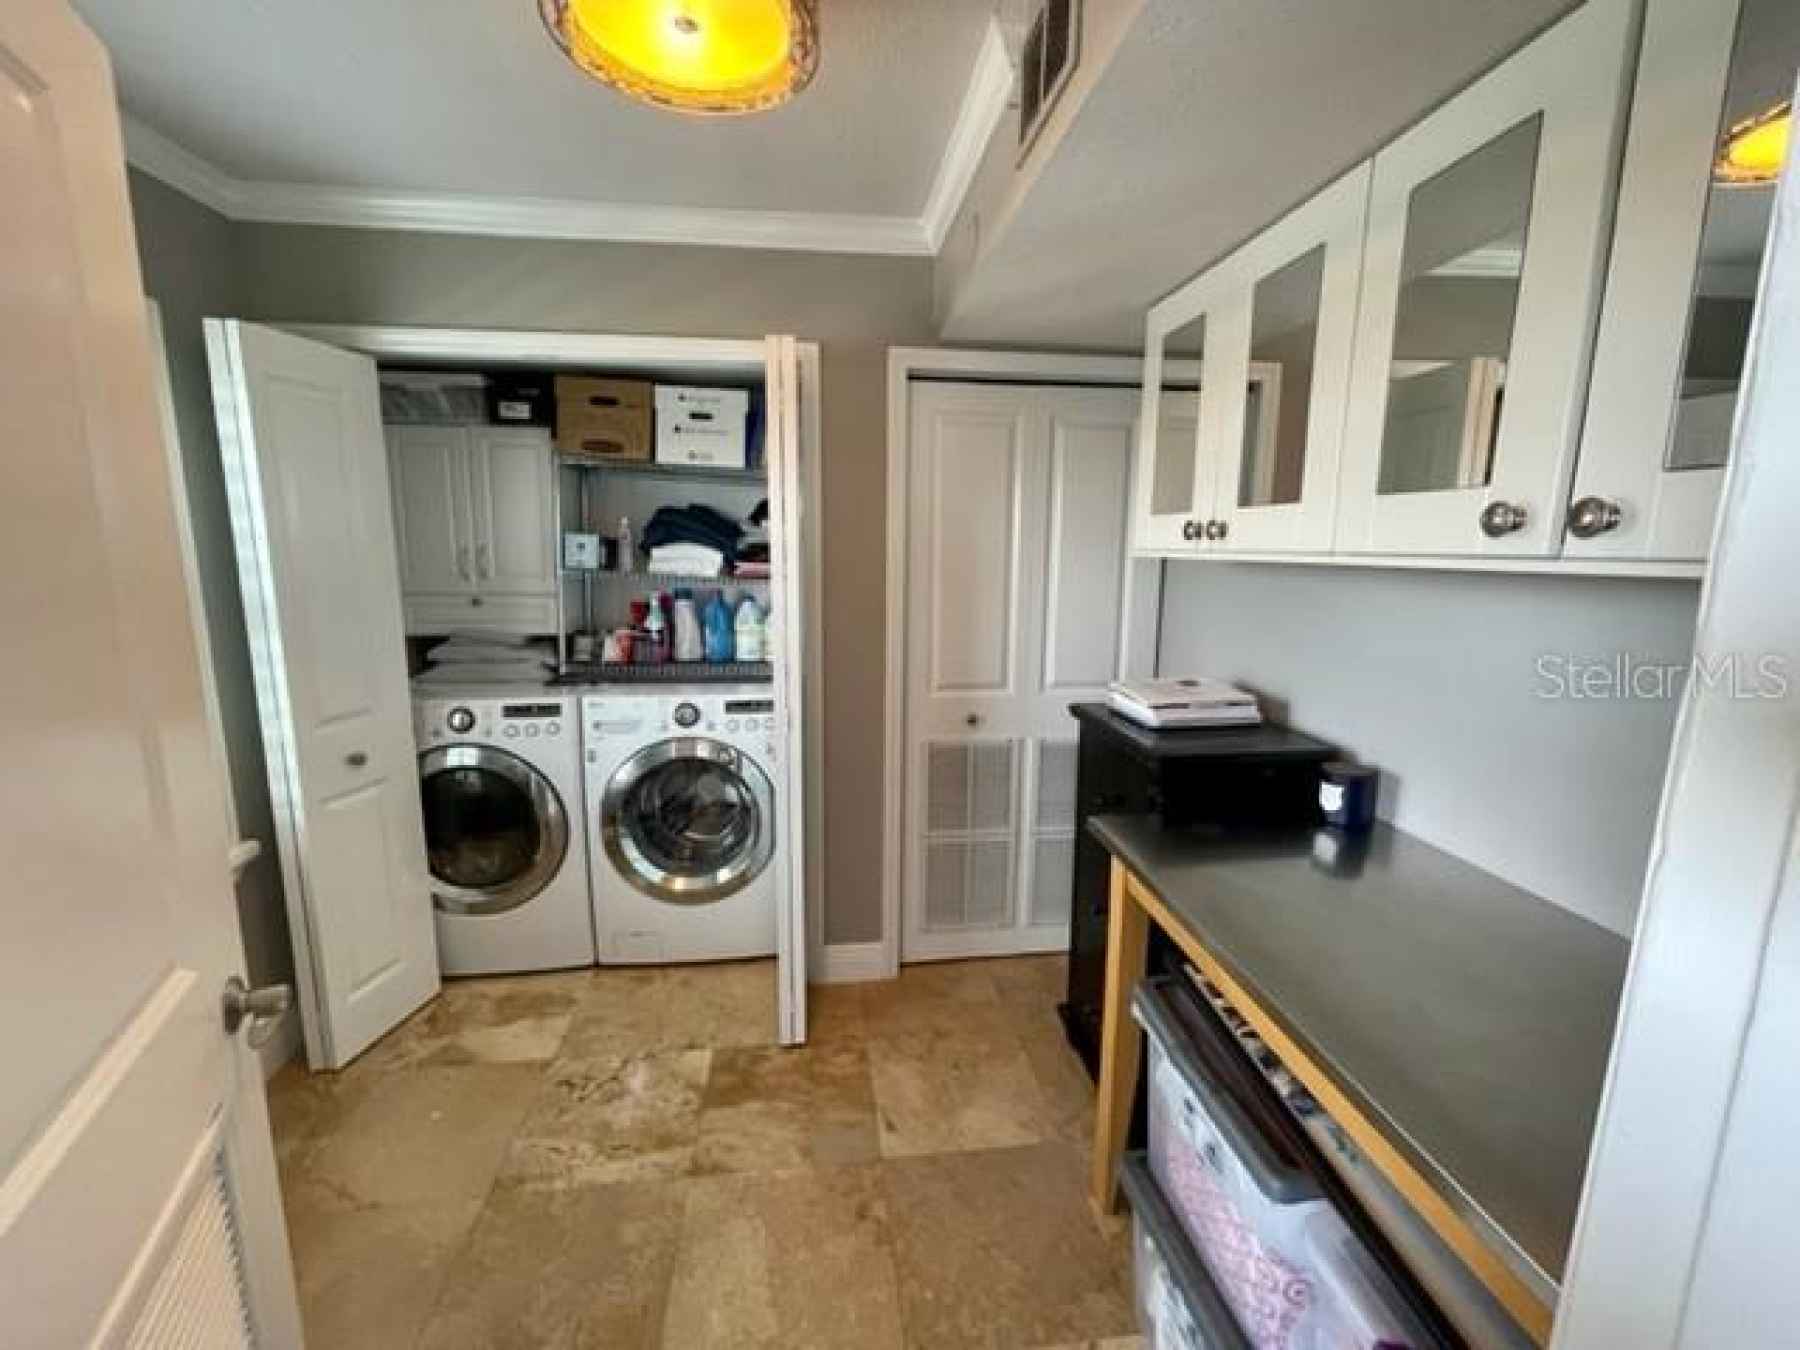 INDOOR LAUNDRY ROOM LARGE ENOUGH TO ALSO USE AS SMALL OFFICE